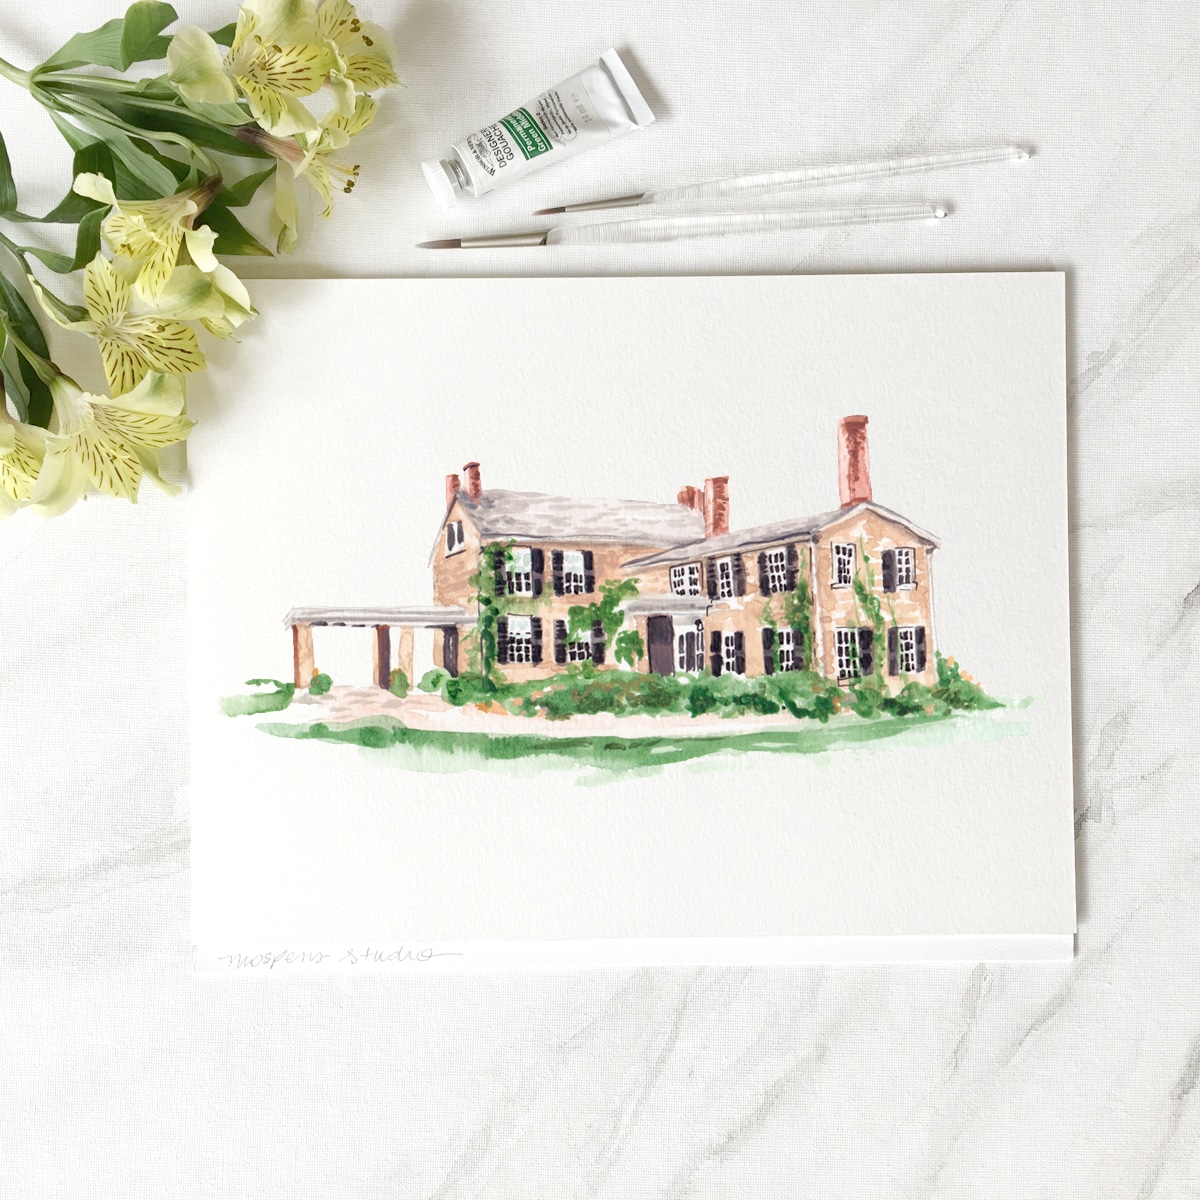 Hand-painted venue illustration art by artist Michelle Mospens. Perfect for your wedding venue invitations. - Mospens Studio